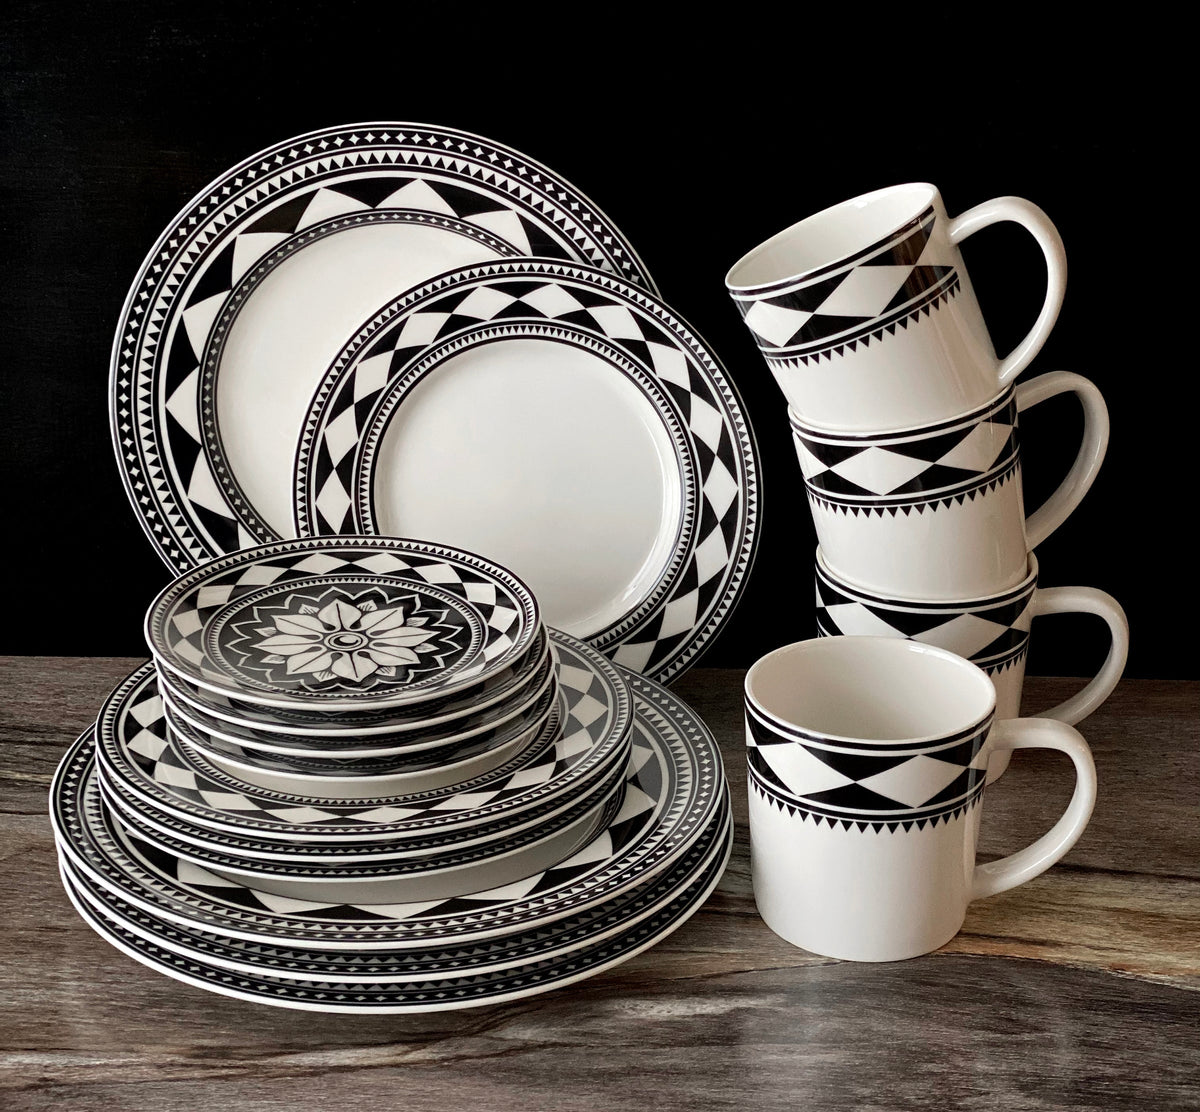 A set of black and white geometric patterned dinnerware including plates, bowls, and a Fez Mug from Caskata Artisanal Home, all made from high-fired porcelain and neatly stacked on a wooden surface. Dishwasher and microwave safe.